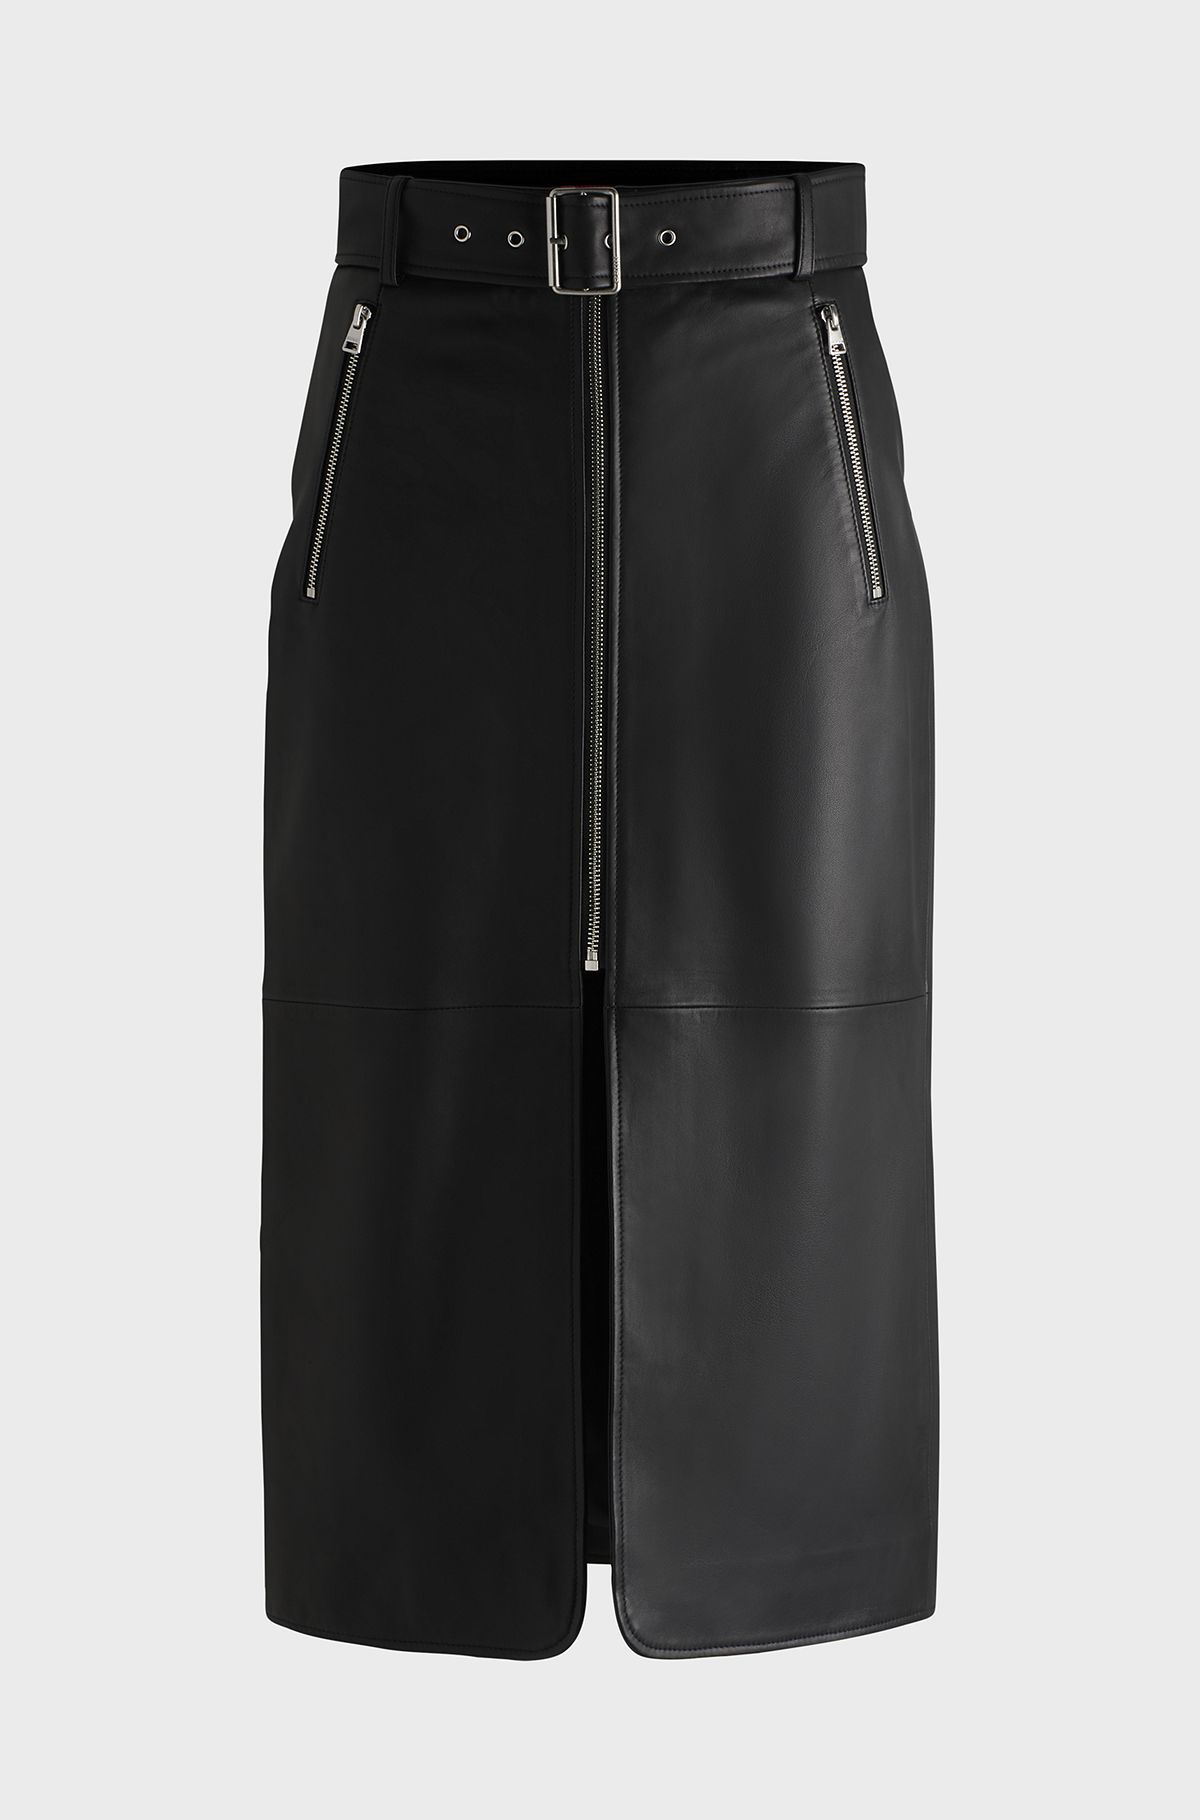 Leather midi skirt with zips and belt, Black